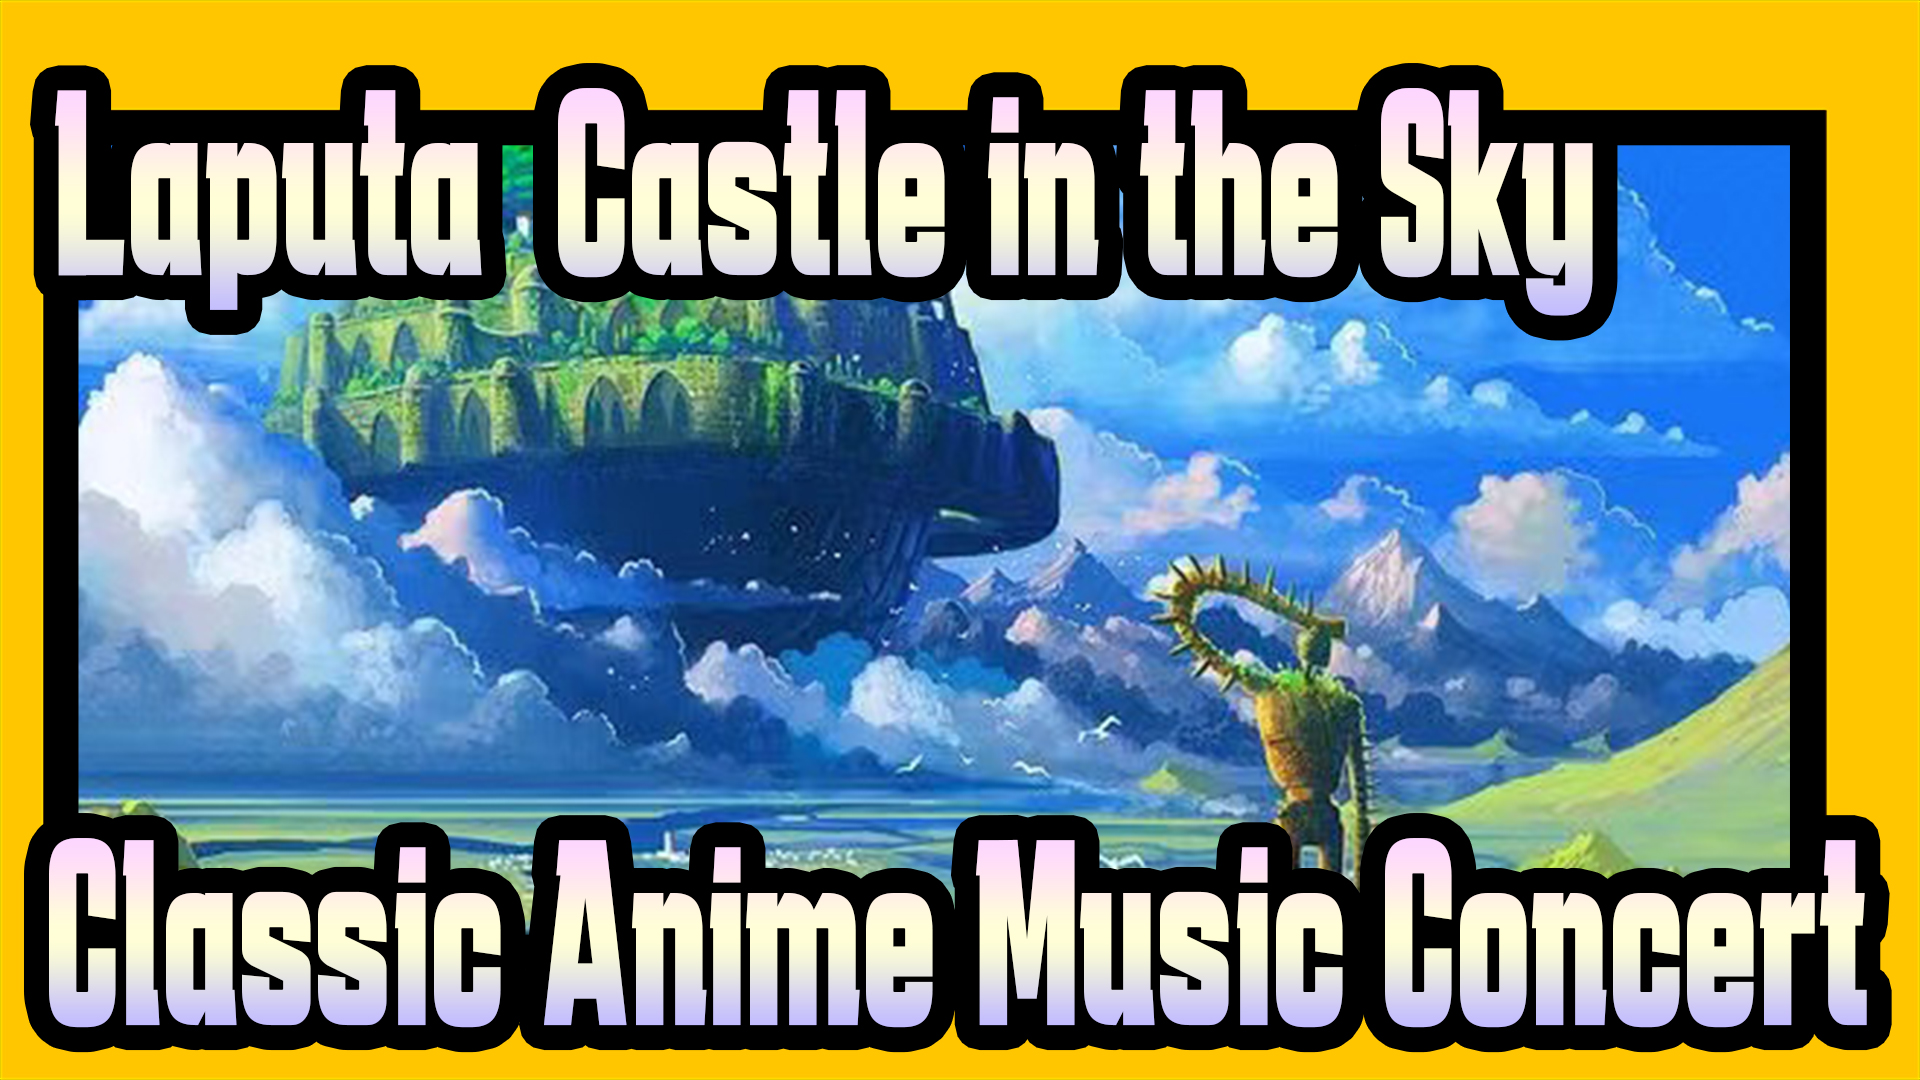 10 musical anime all music lovers should definitely check out